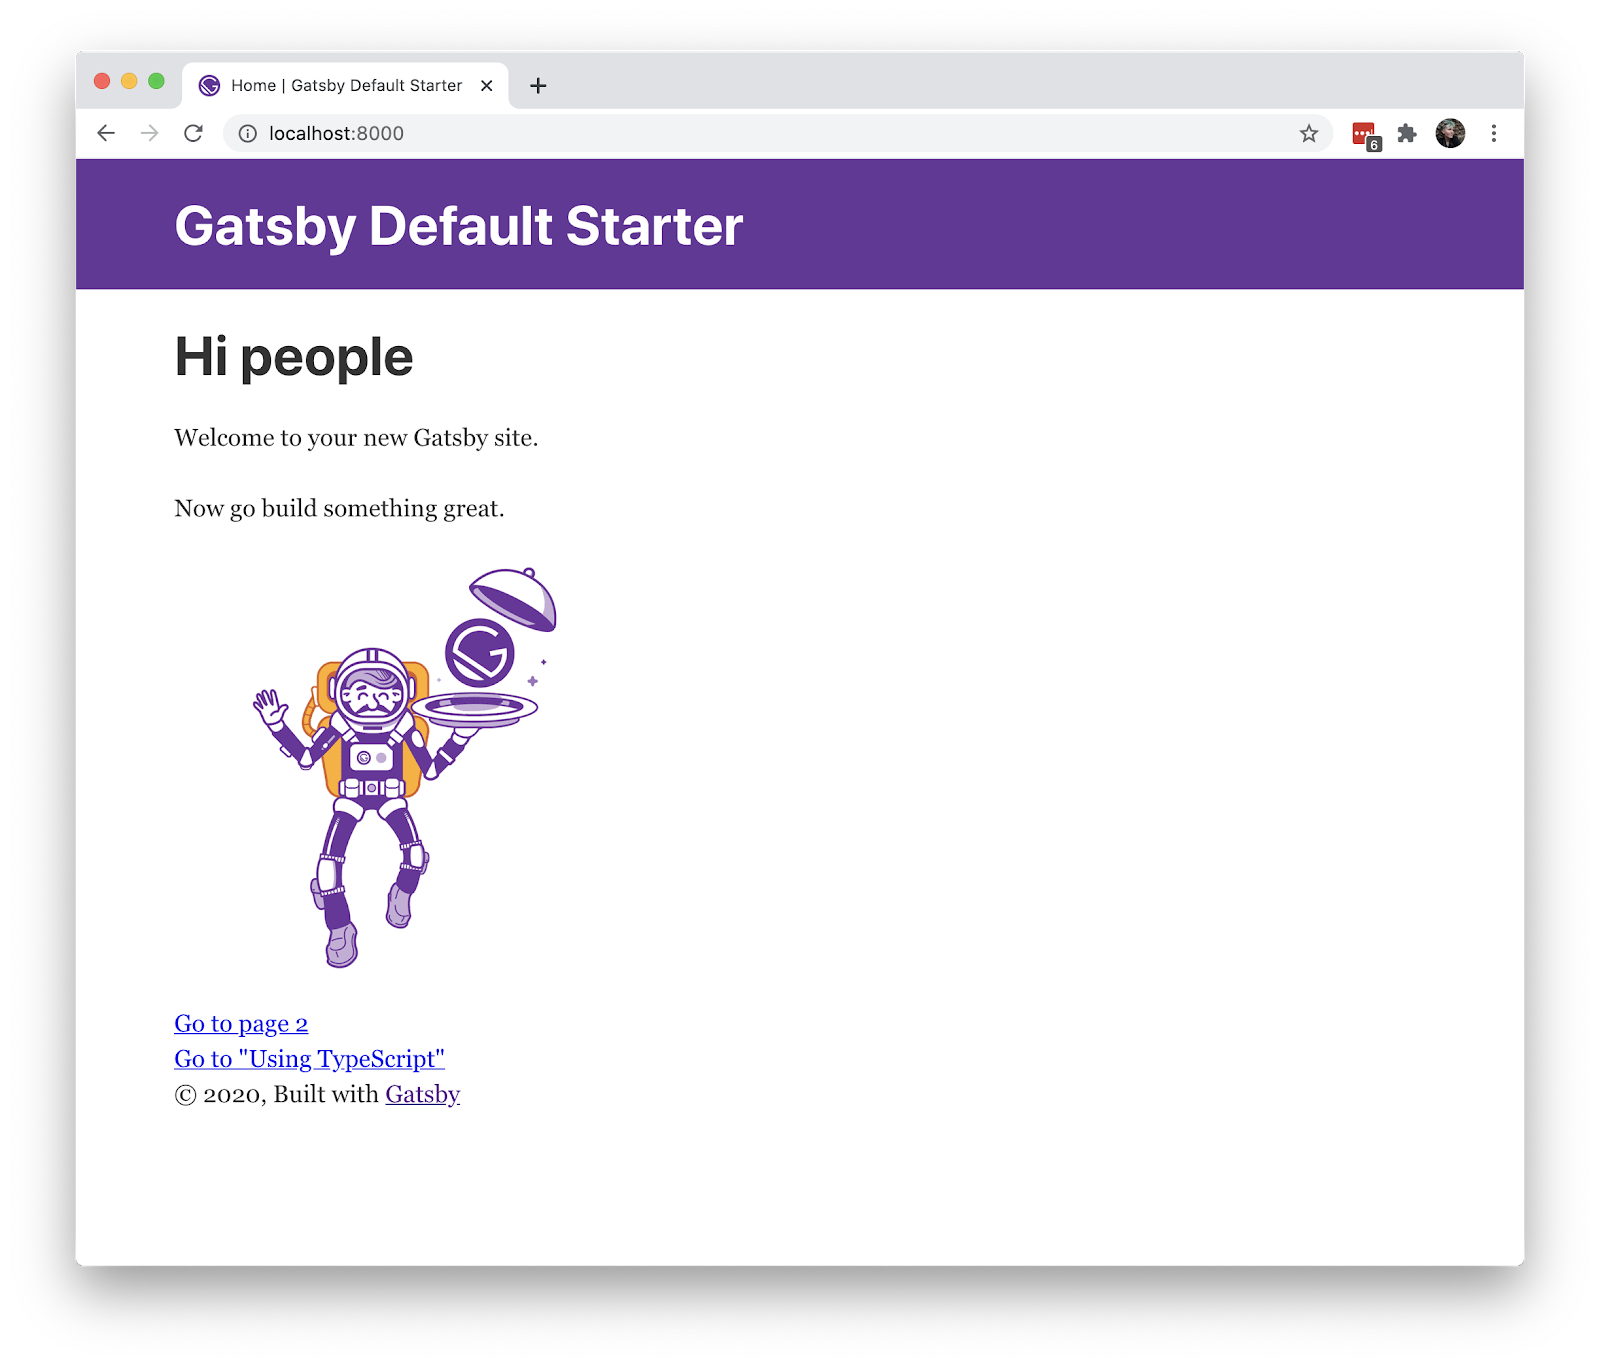 Screenshot of Gatsby default starter app running on localhost. The text says "Hi people. Welcome to your new Gatsby site. Now go build something great."